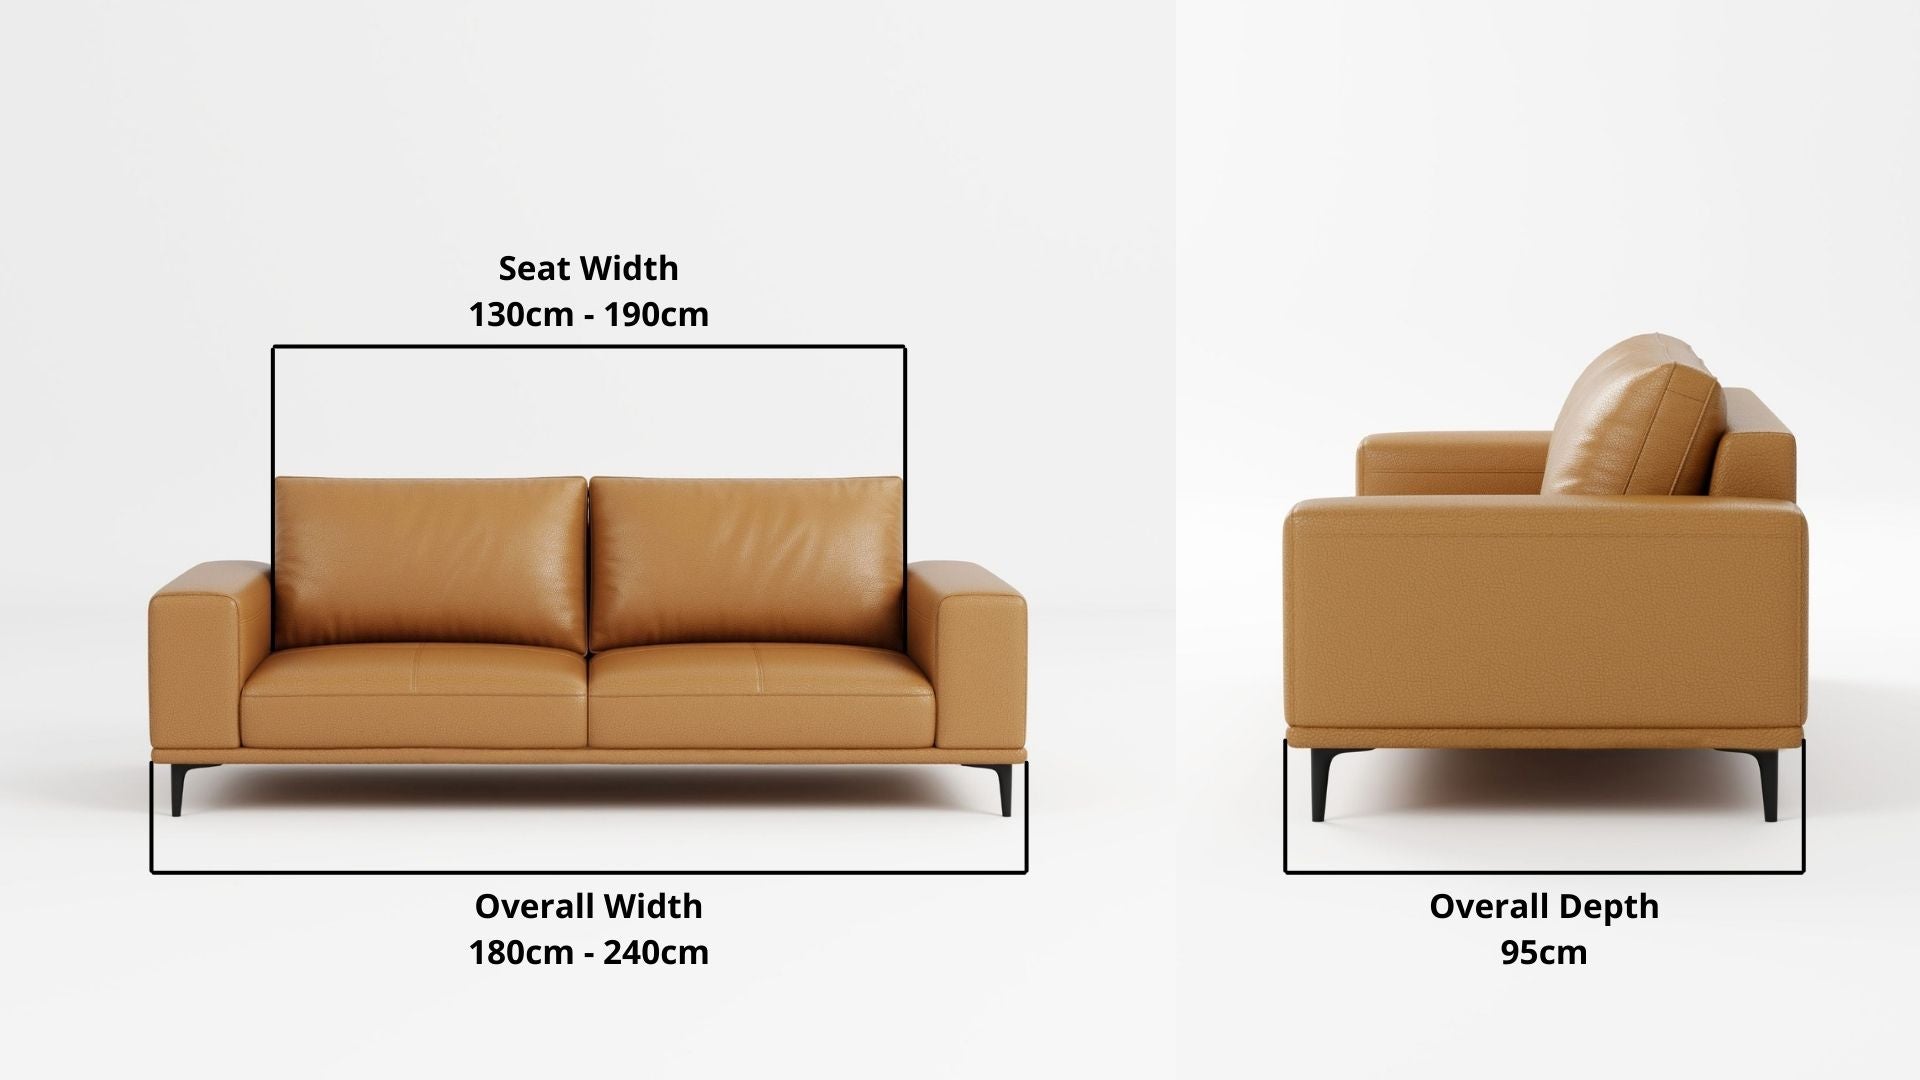 Details the key dimensions in terms of overall width, overall depth and seat width for Calm Half Leather Sofa